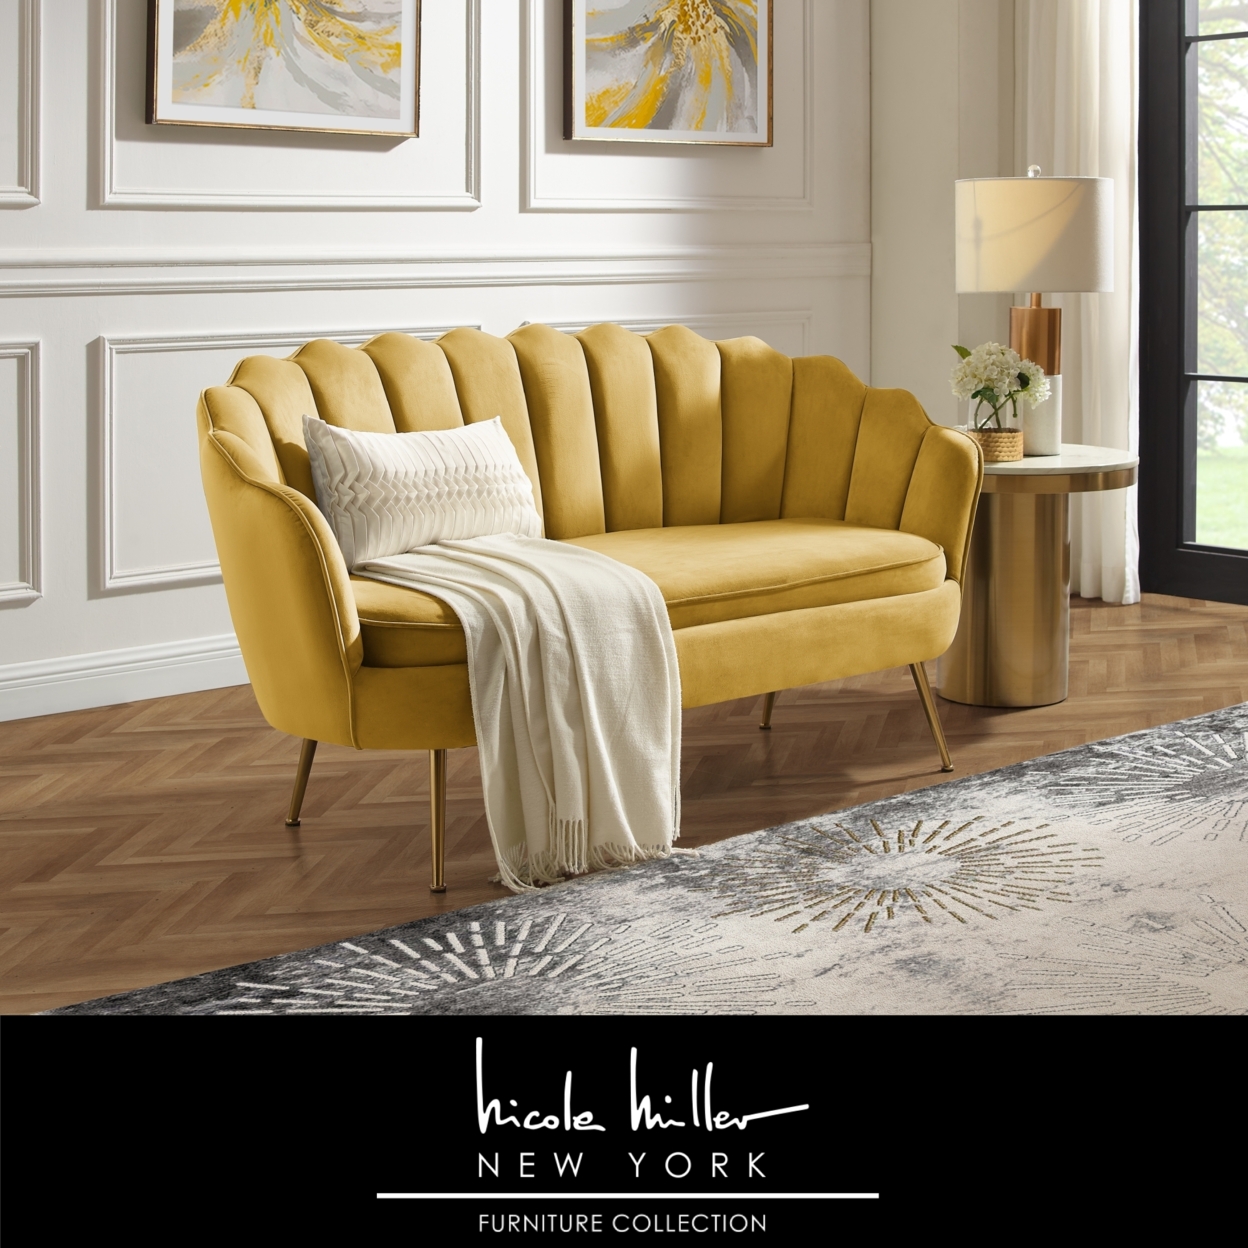 Dallin Loveseat - Upholstered Channel Tufted, Scalloped Edges, Tapered Polished Gold Legs - Hunter Green